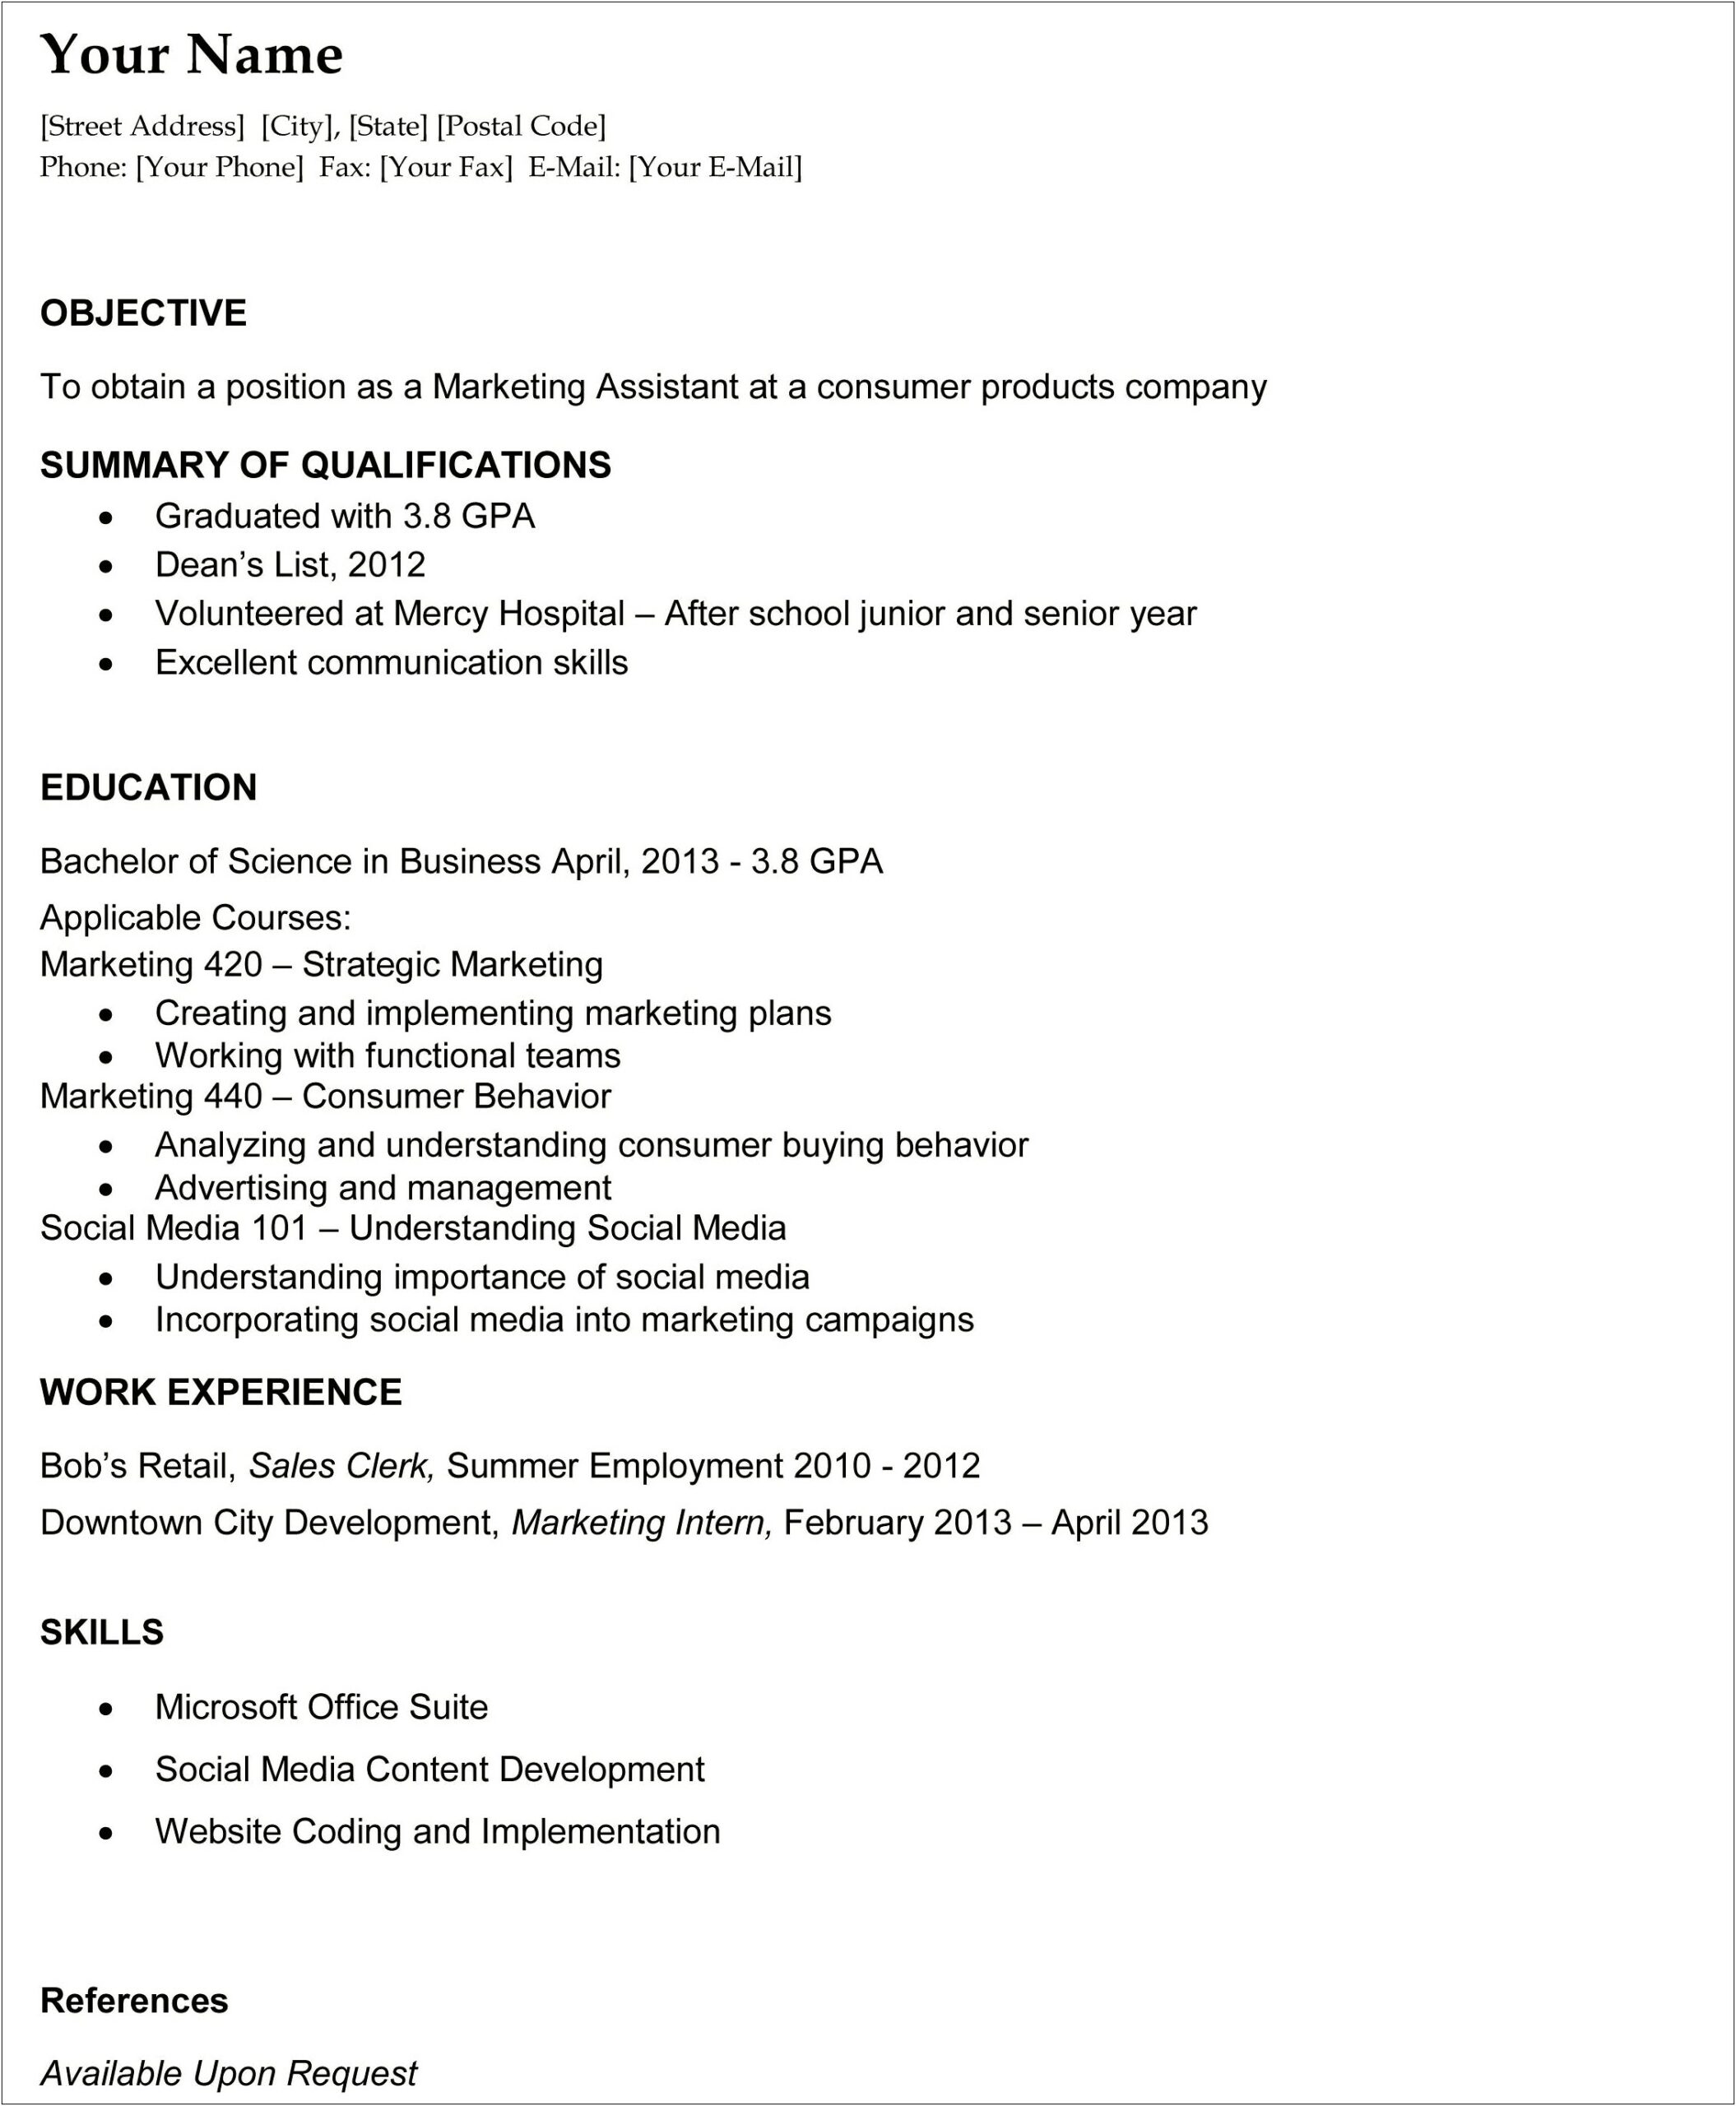 Resume Objective Higher Education Examples